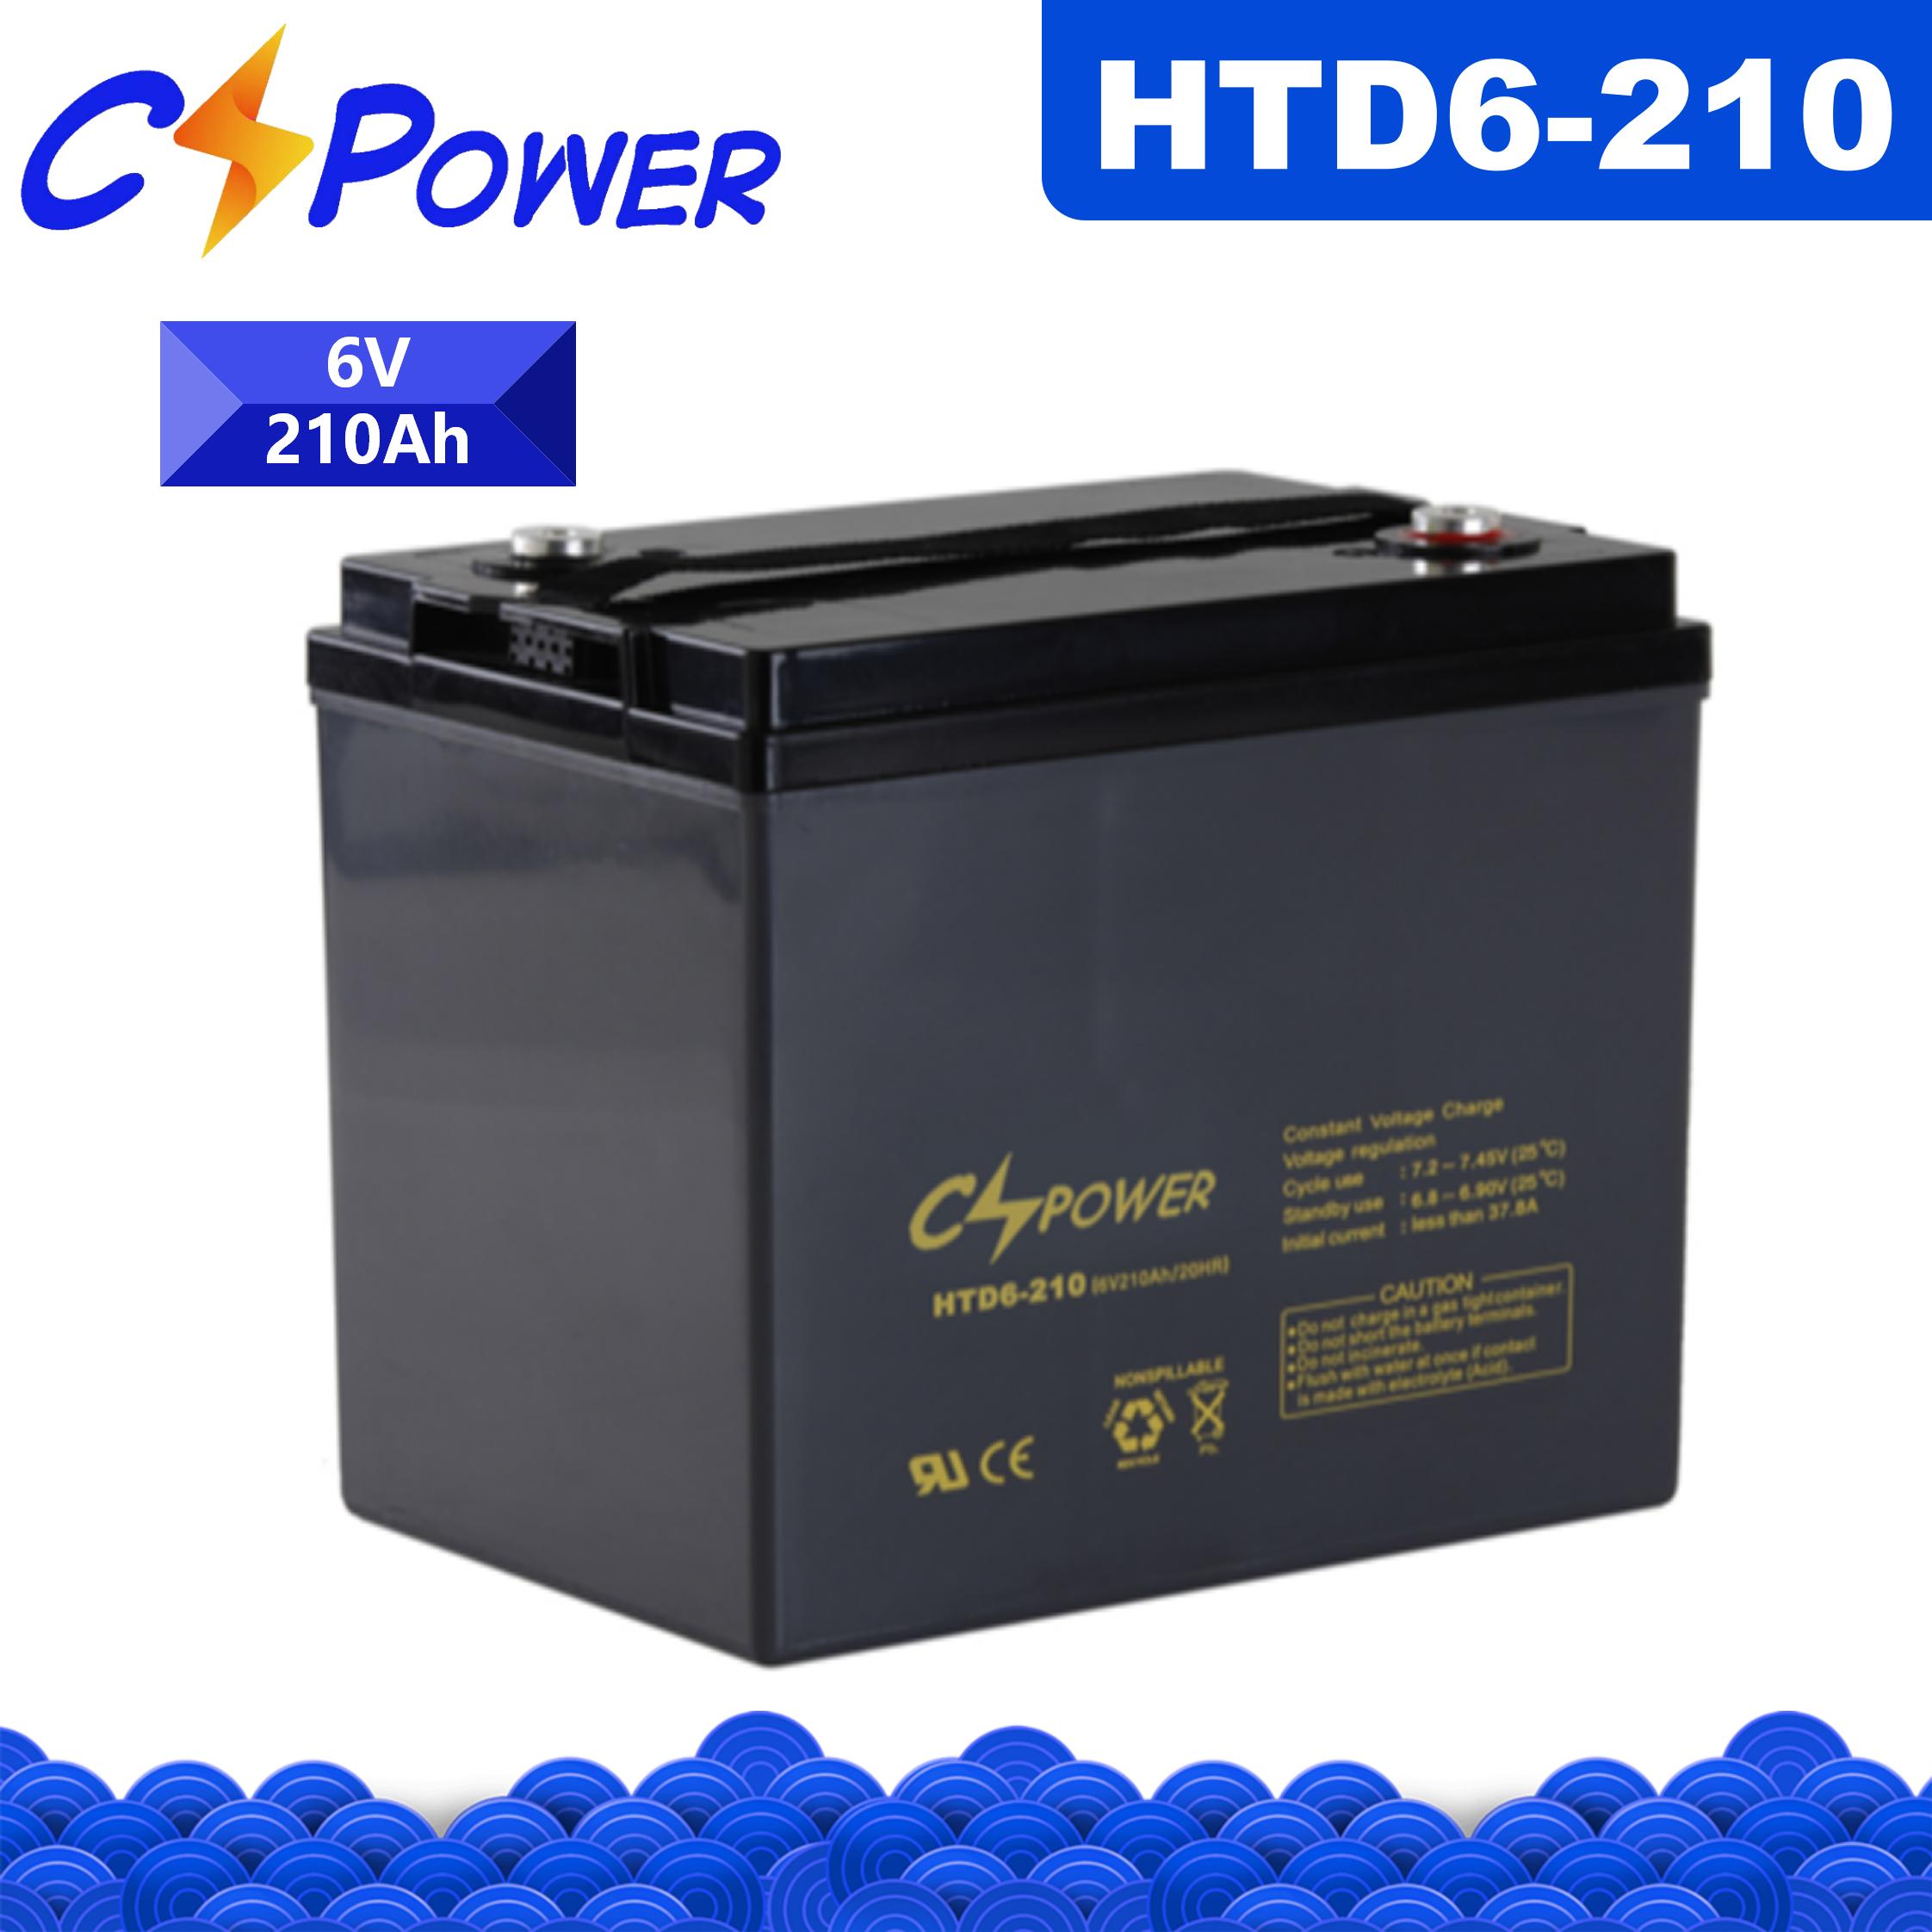 CSPower HTD6-210 Deep Cycle VRLA AGM Battery